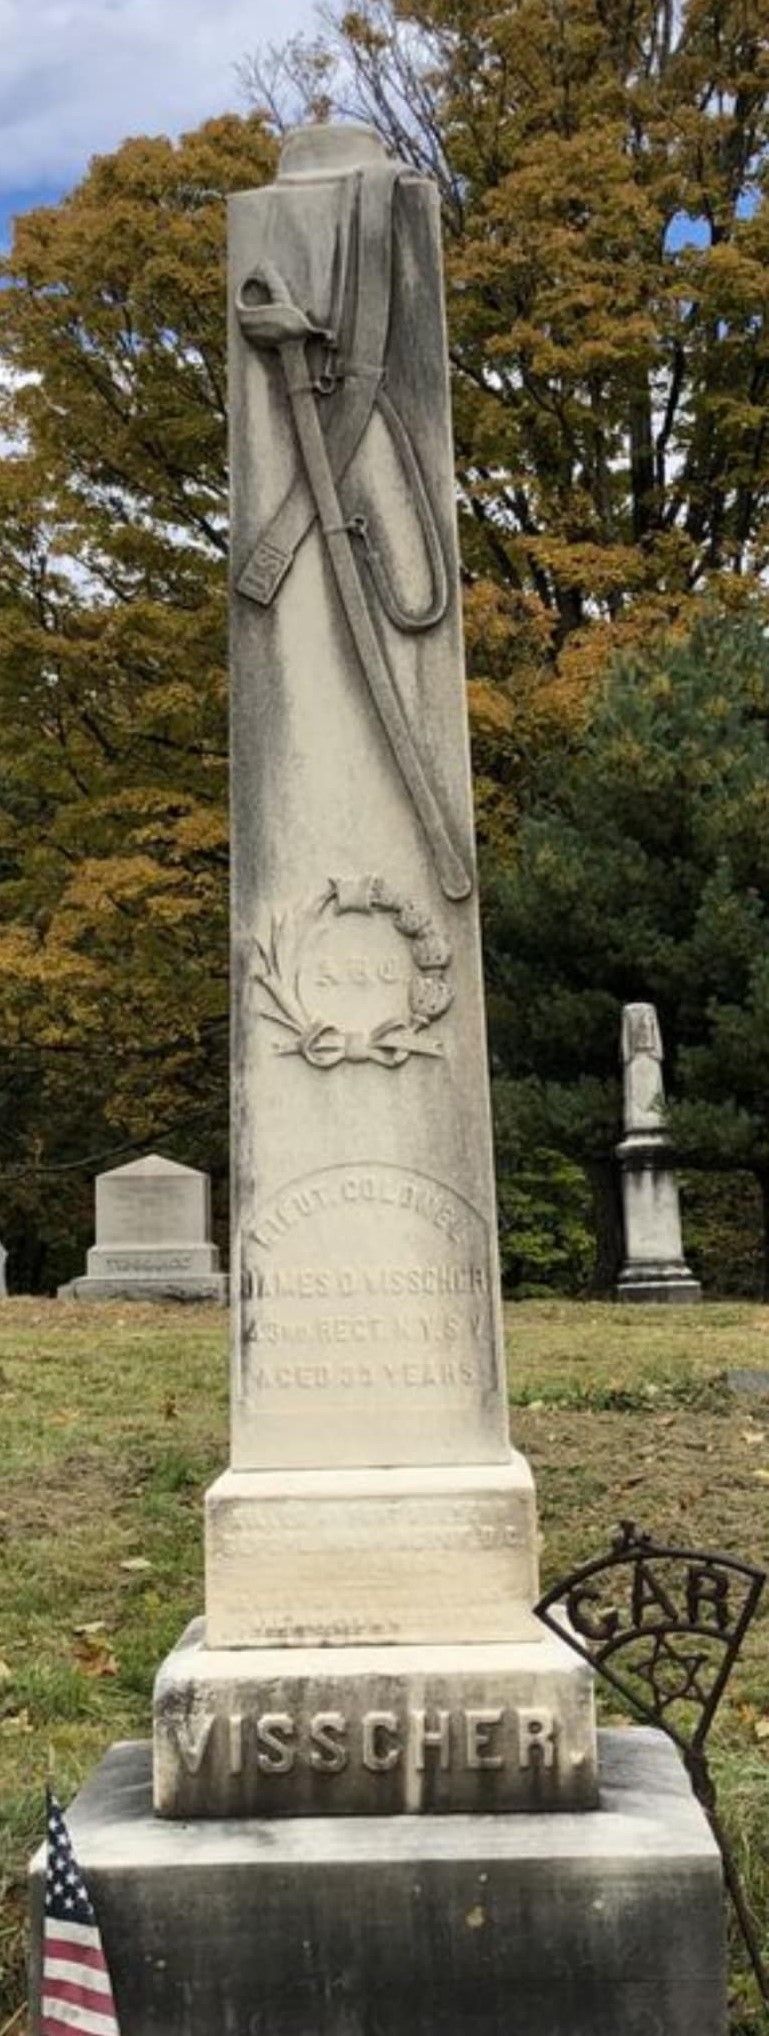 A Civil War Walking Tour of Albany Rural Cemetery